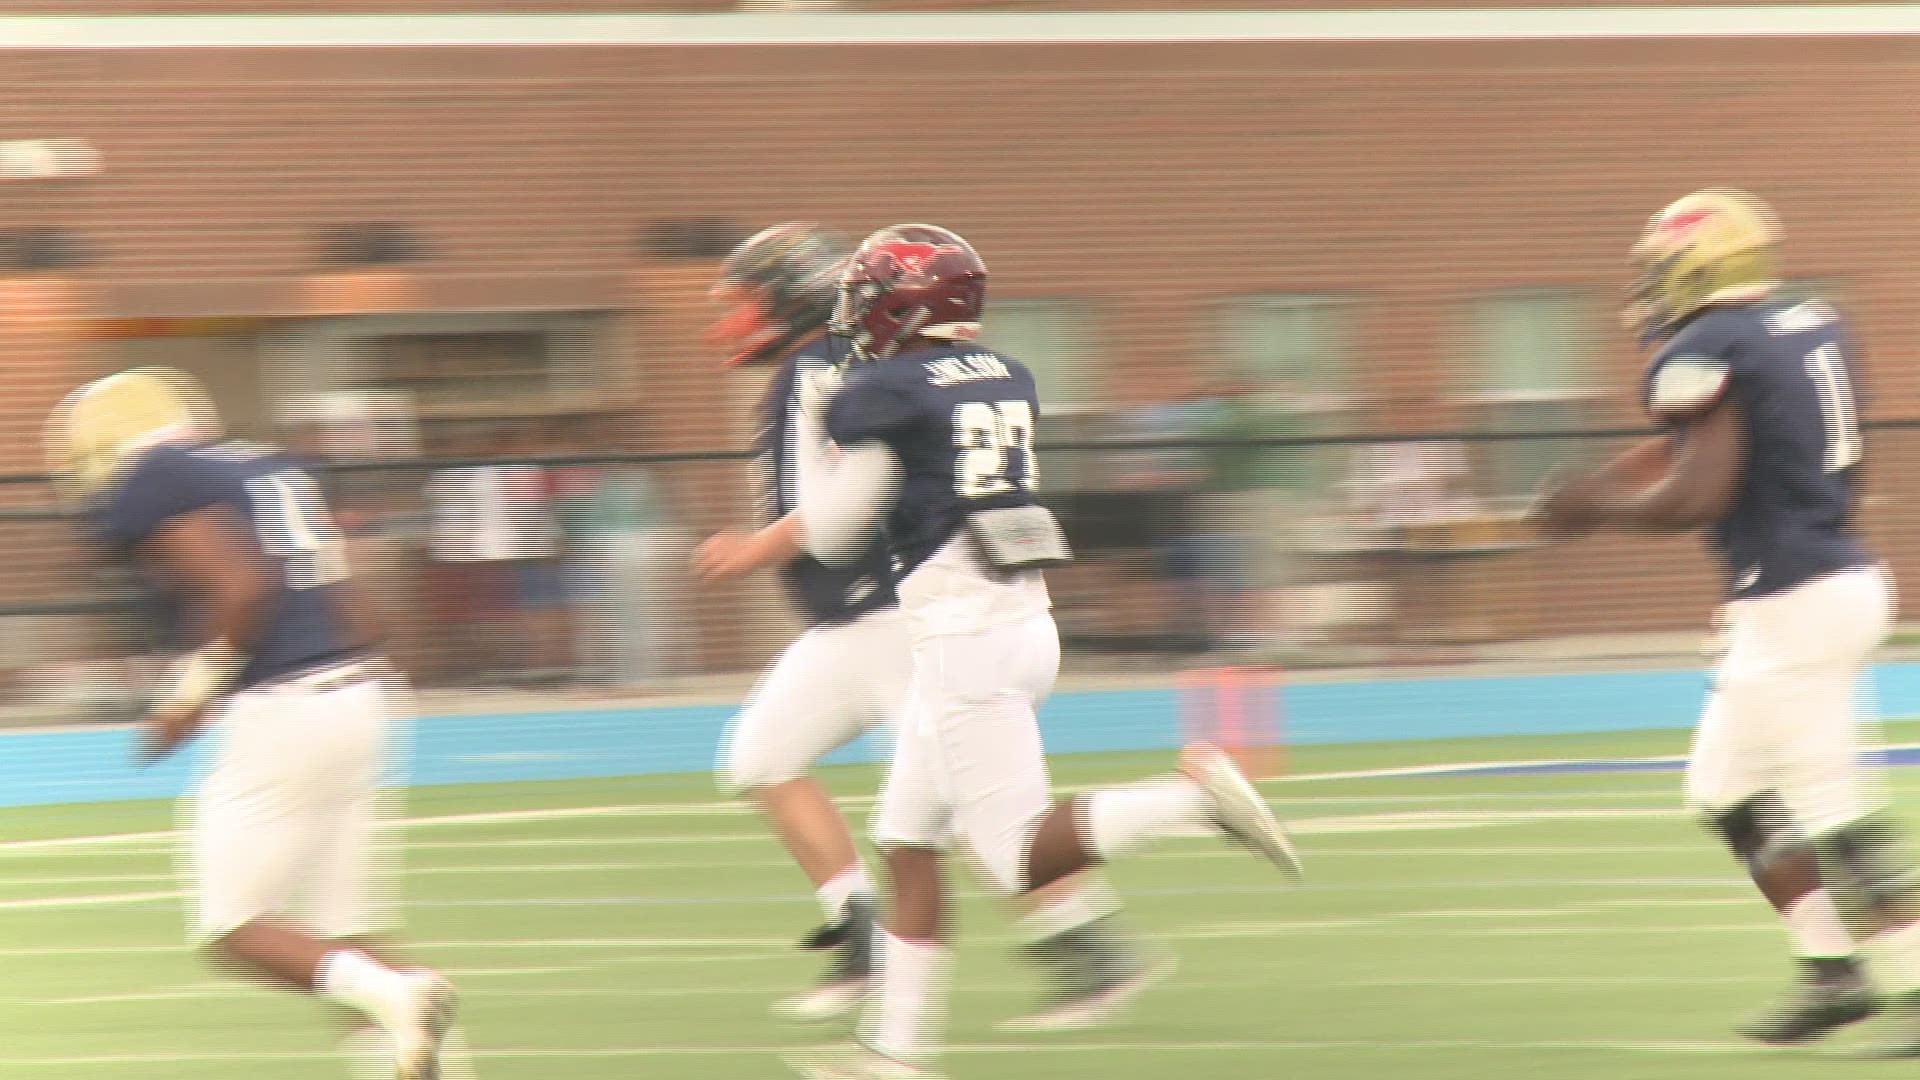 Highlights from the Kensington Lions All Star game.